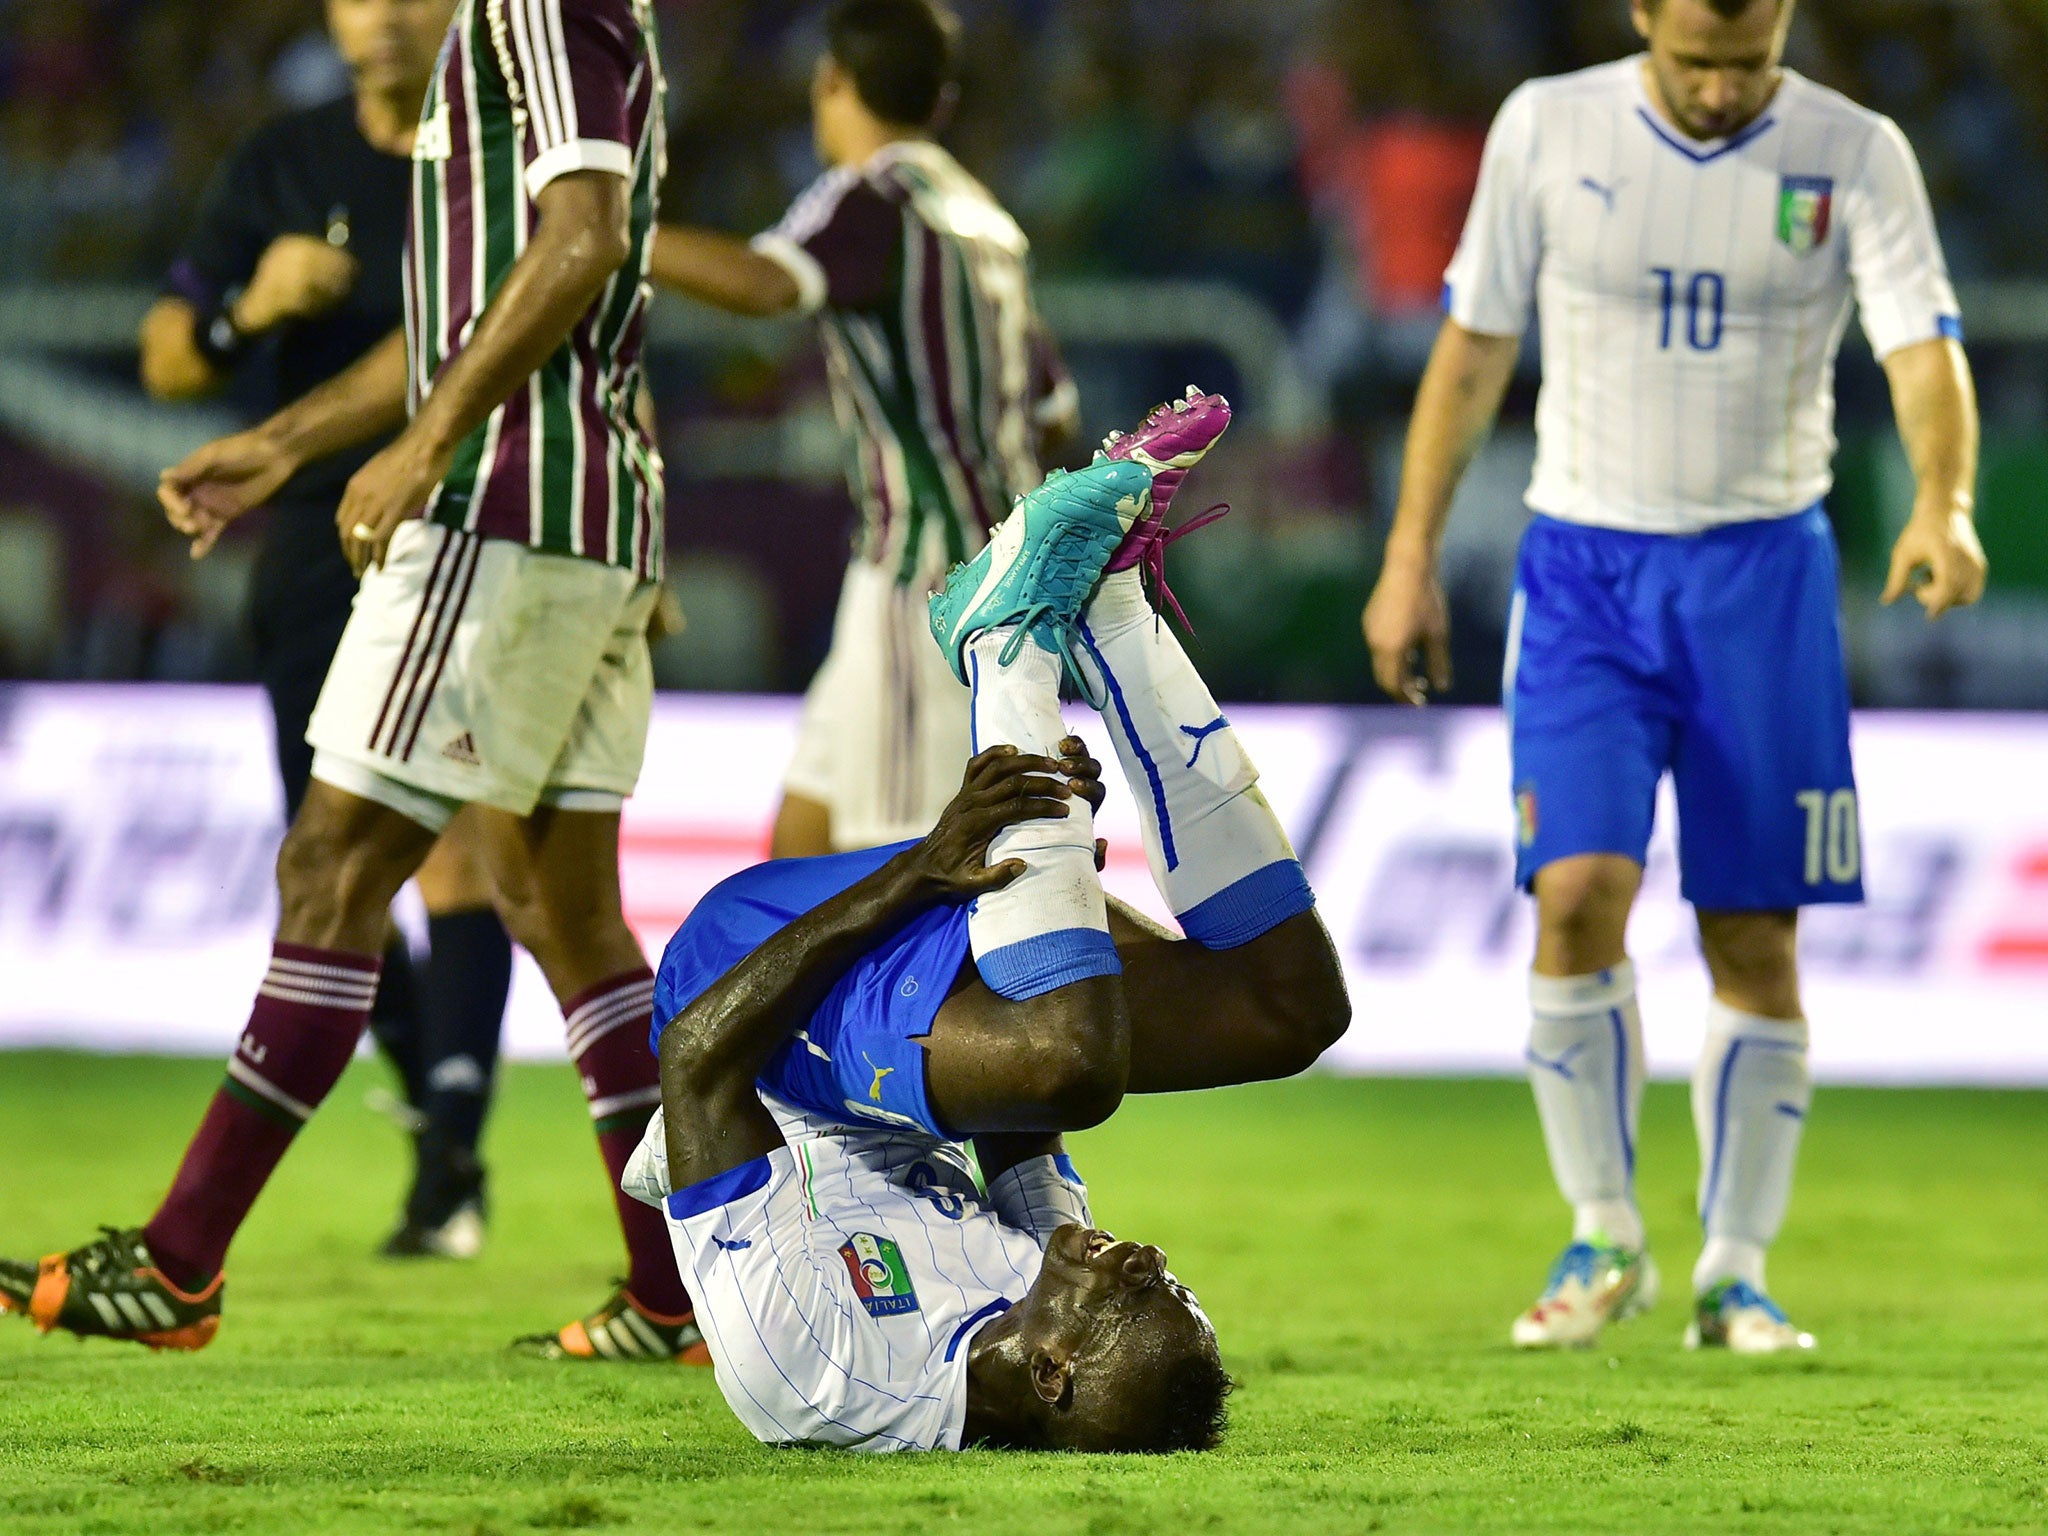 Italy's forward Mario Balotelli lies on the pitch after being injured during a friendly football match between Fluminense and Italy at the Raulino de Oliveira Stadium in Volta Redonda